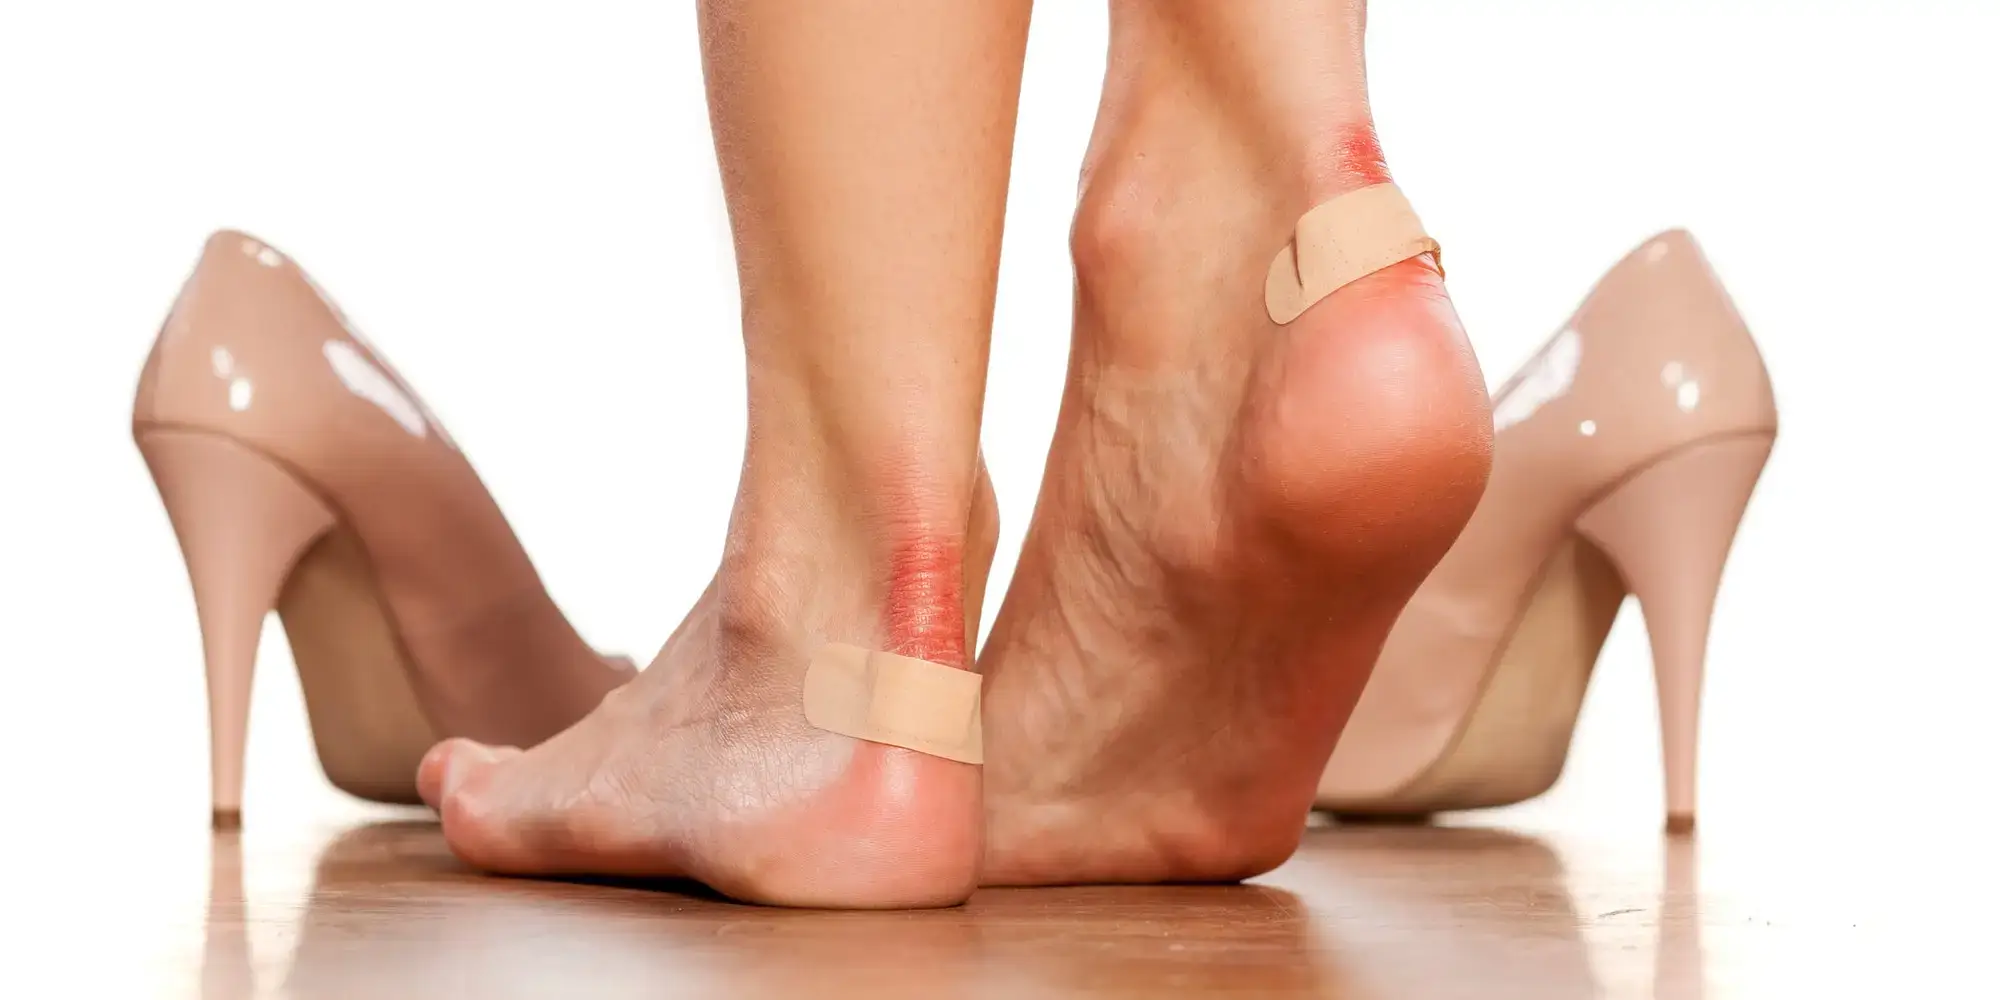 How to Heal Blisters on Feet Overnight